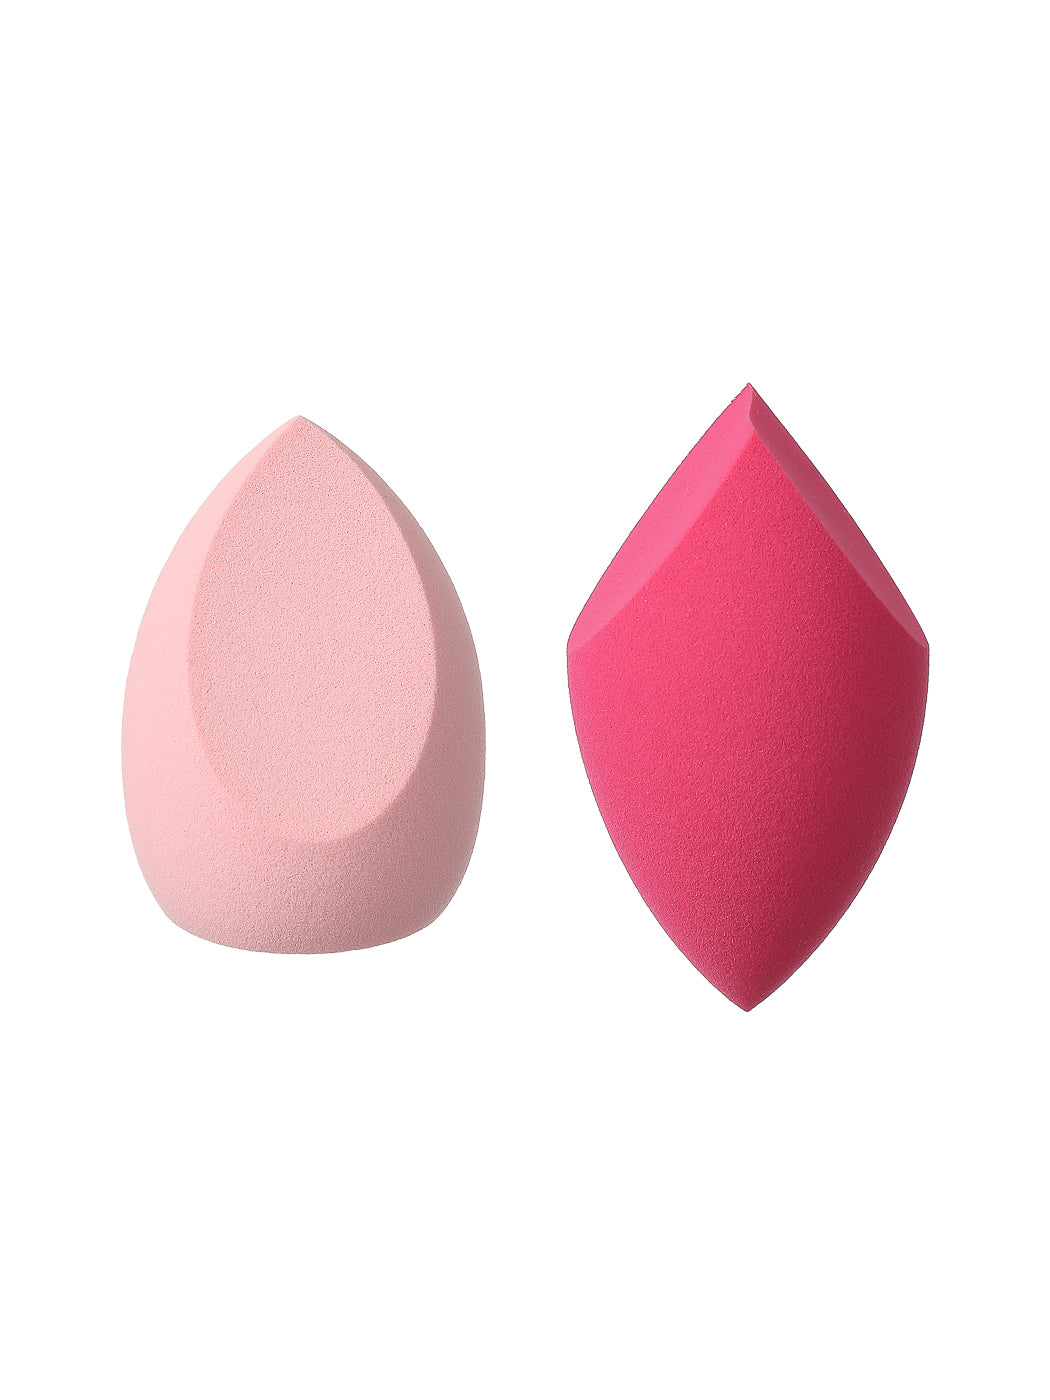 MINISO SOFT SKIN-FRIENDLY MAKEUP SPONGE SET (DOUBLE SLANTED + STAMP) 2010435010107 COSMETIC PUFF